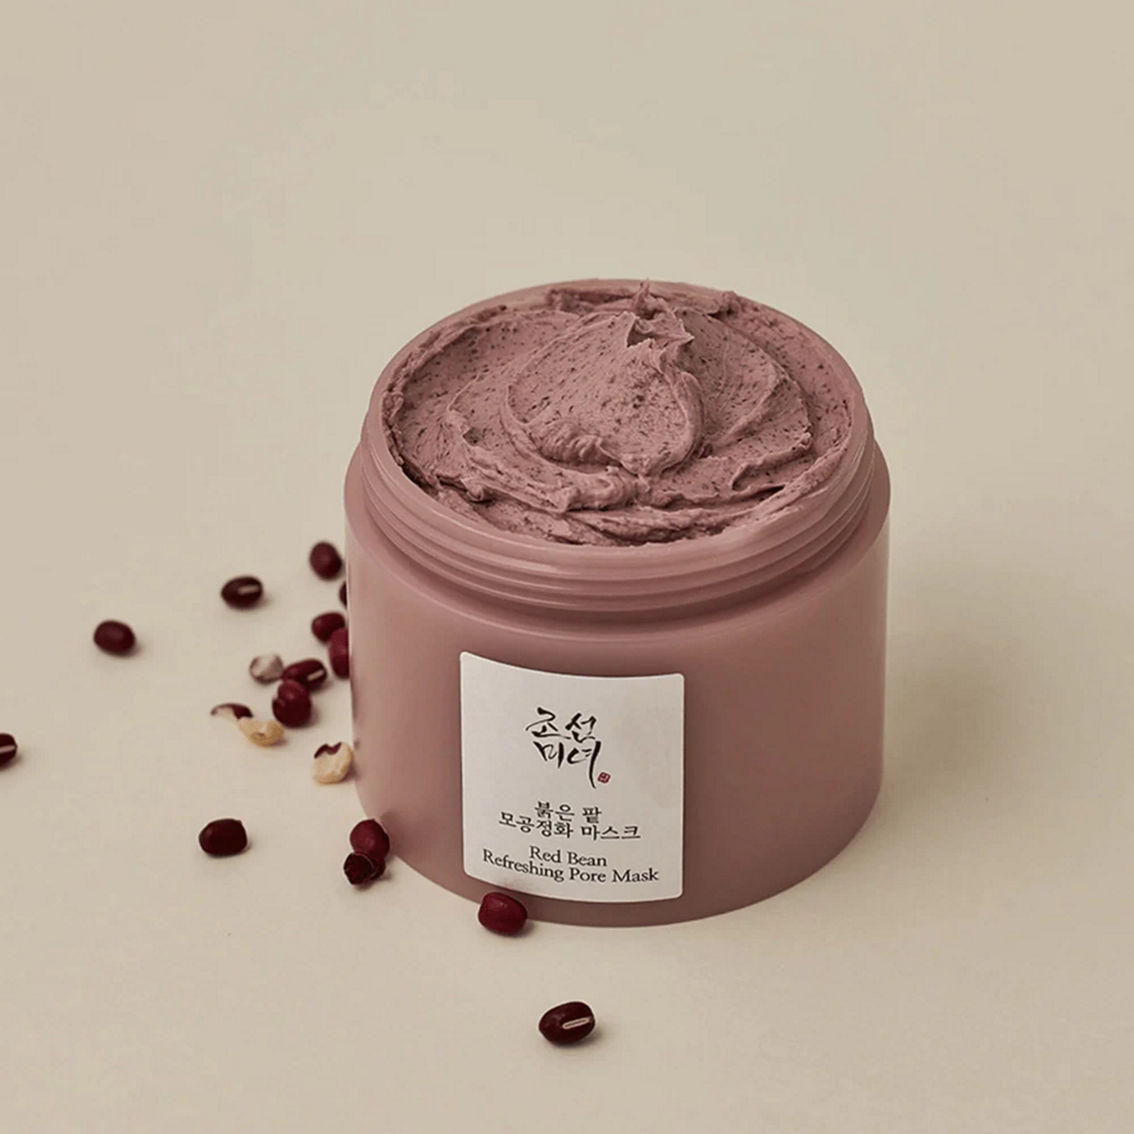 BEAUTY OF JOSEON Red Bean Refreshing Pore Mask 140 ml - Image 5 of 5